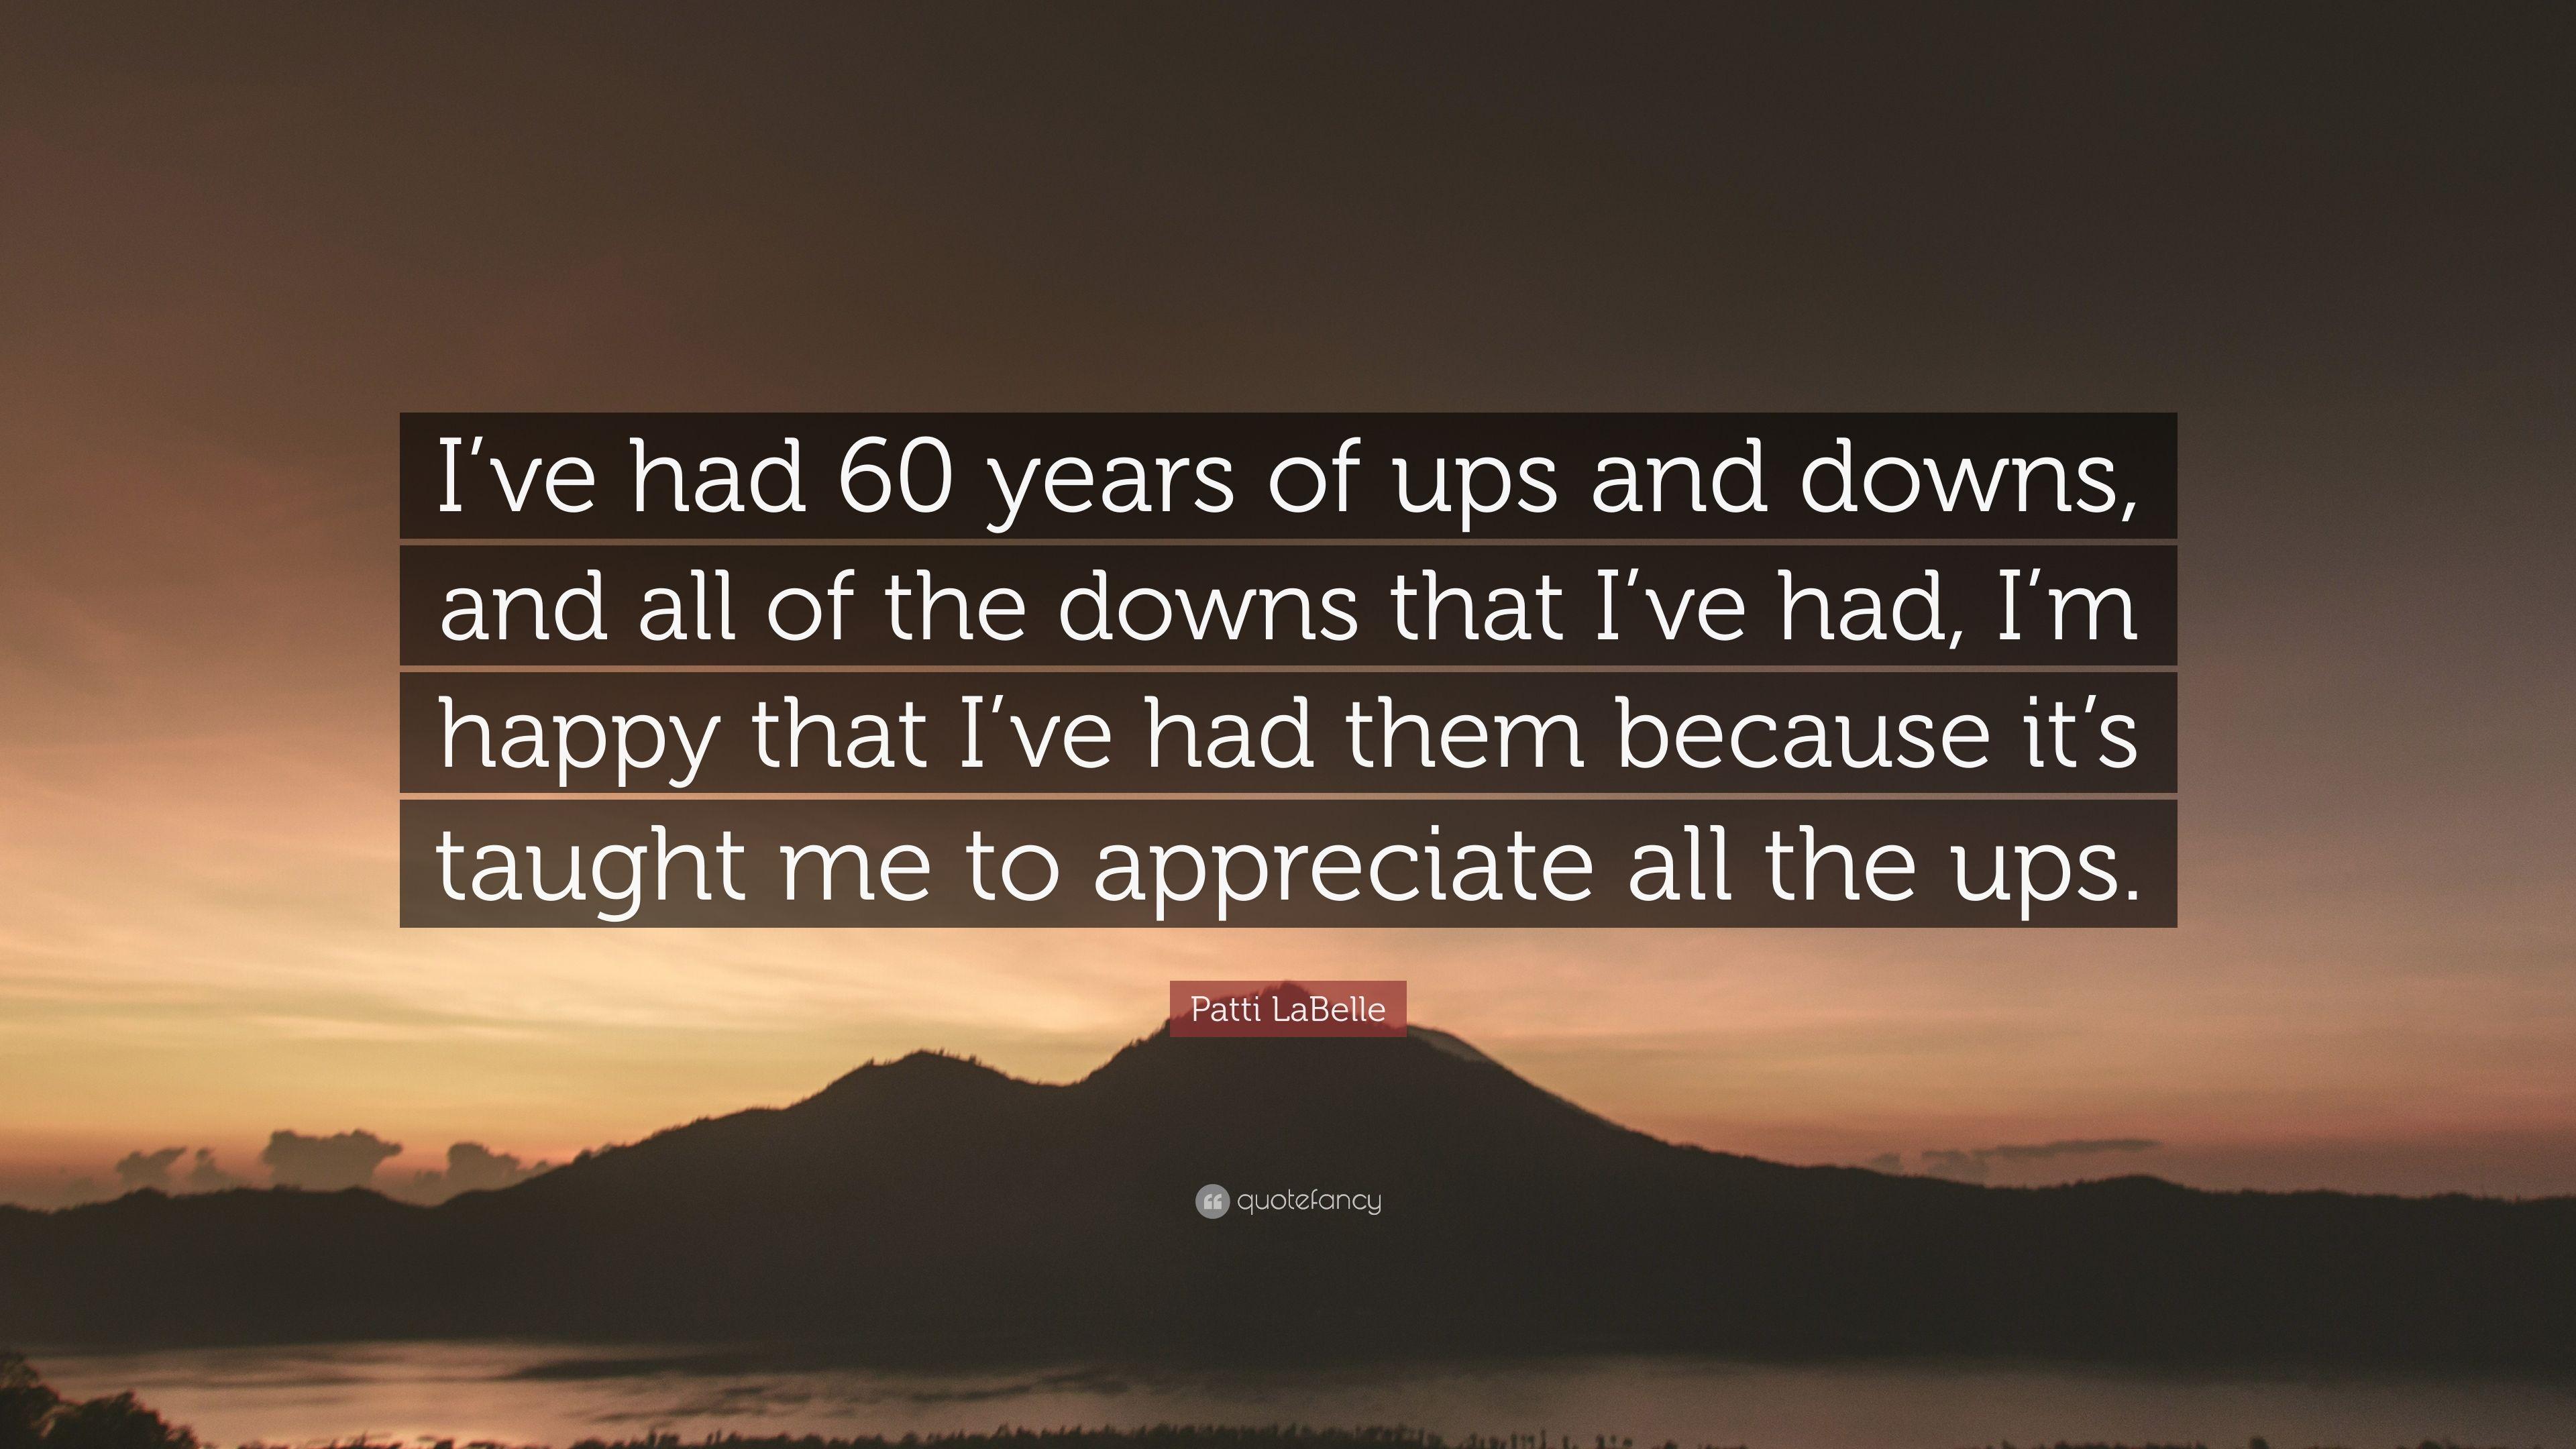 Patti LaBelle Quote: “I've had 60 years of ups and downs